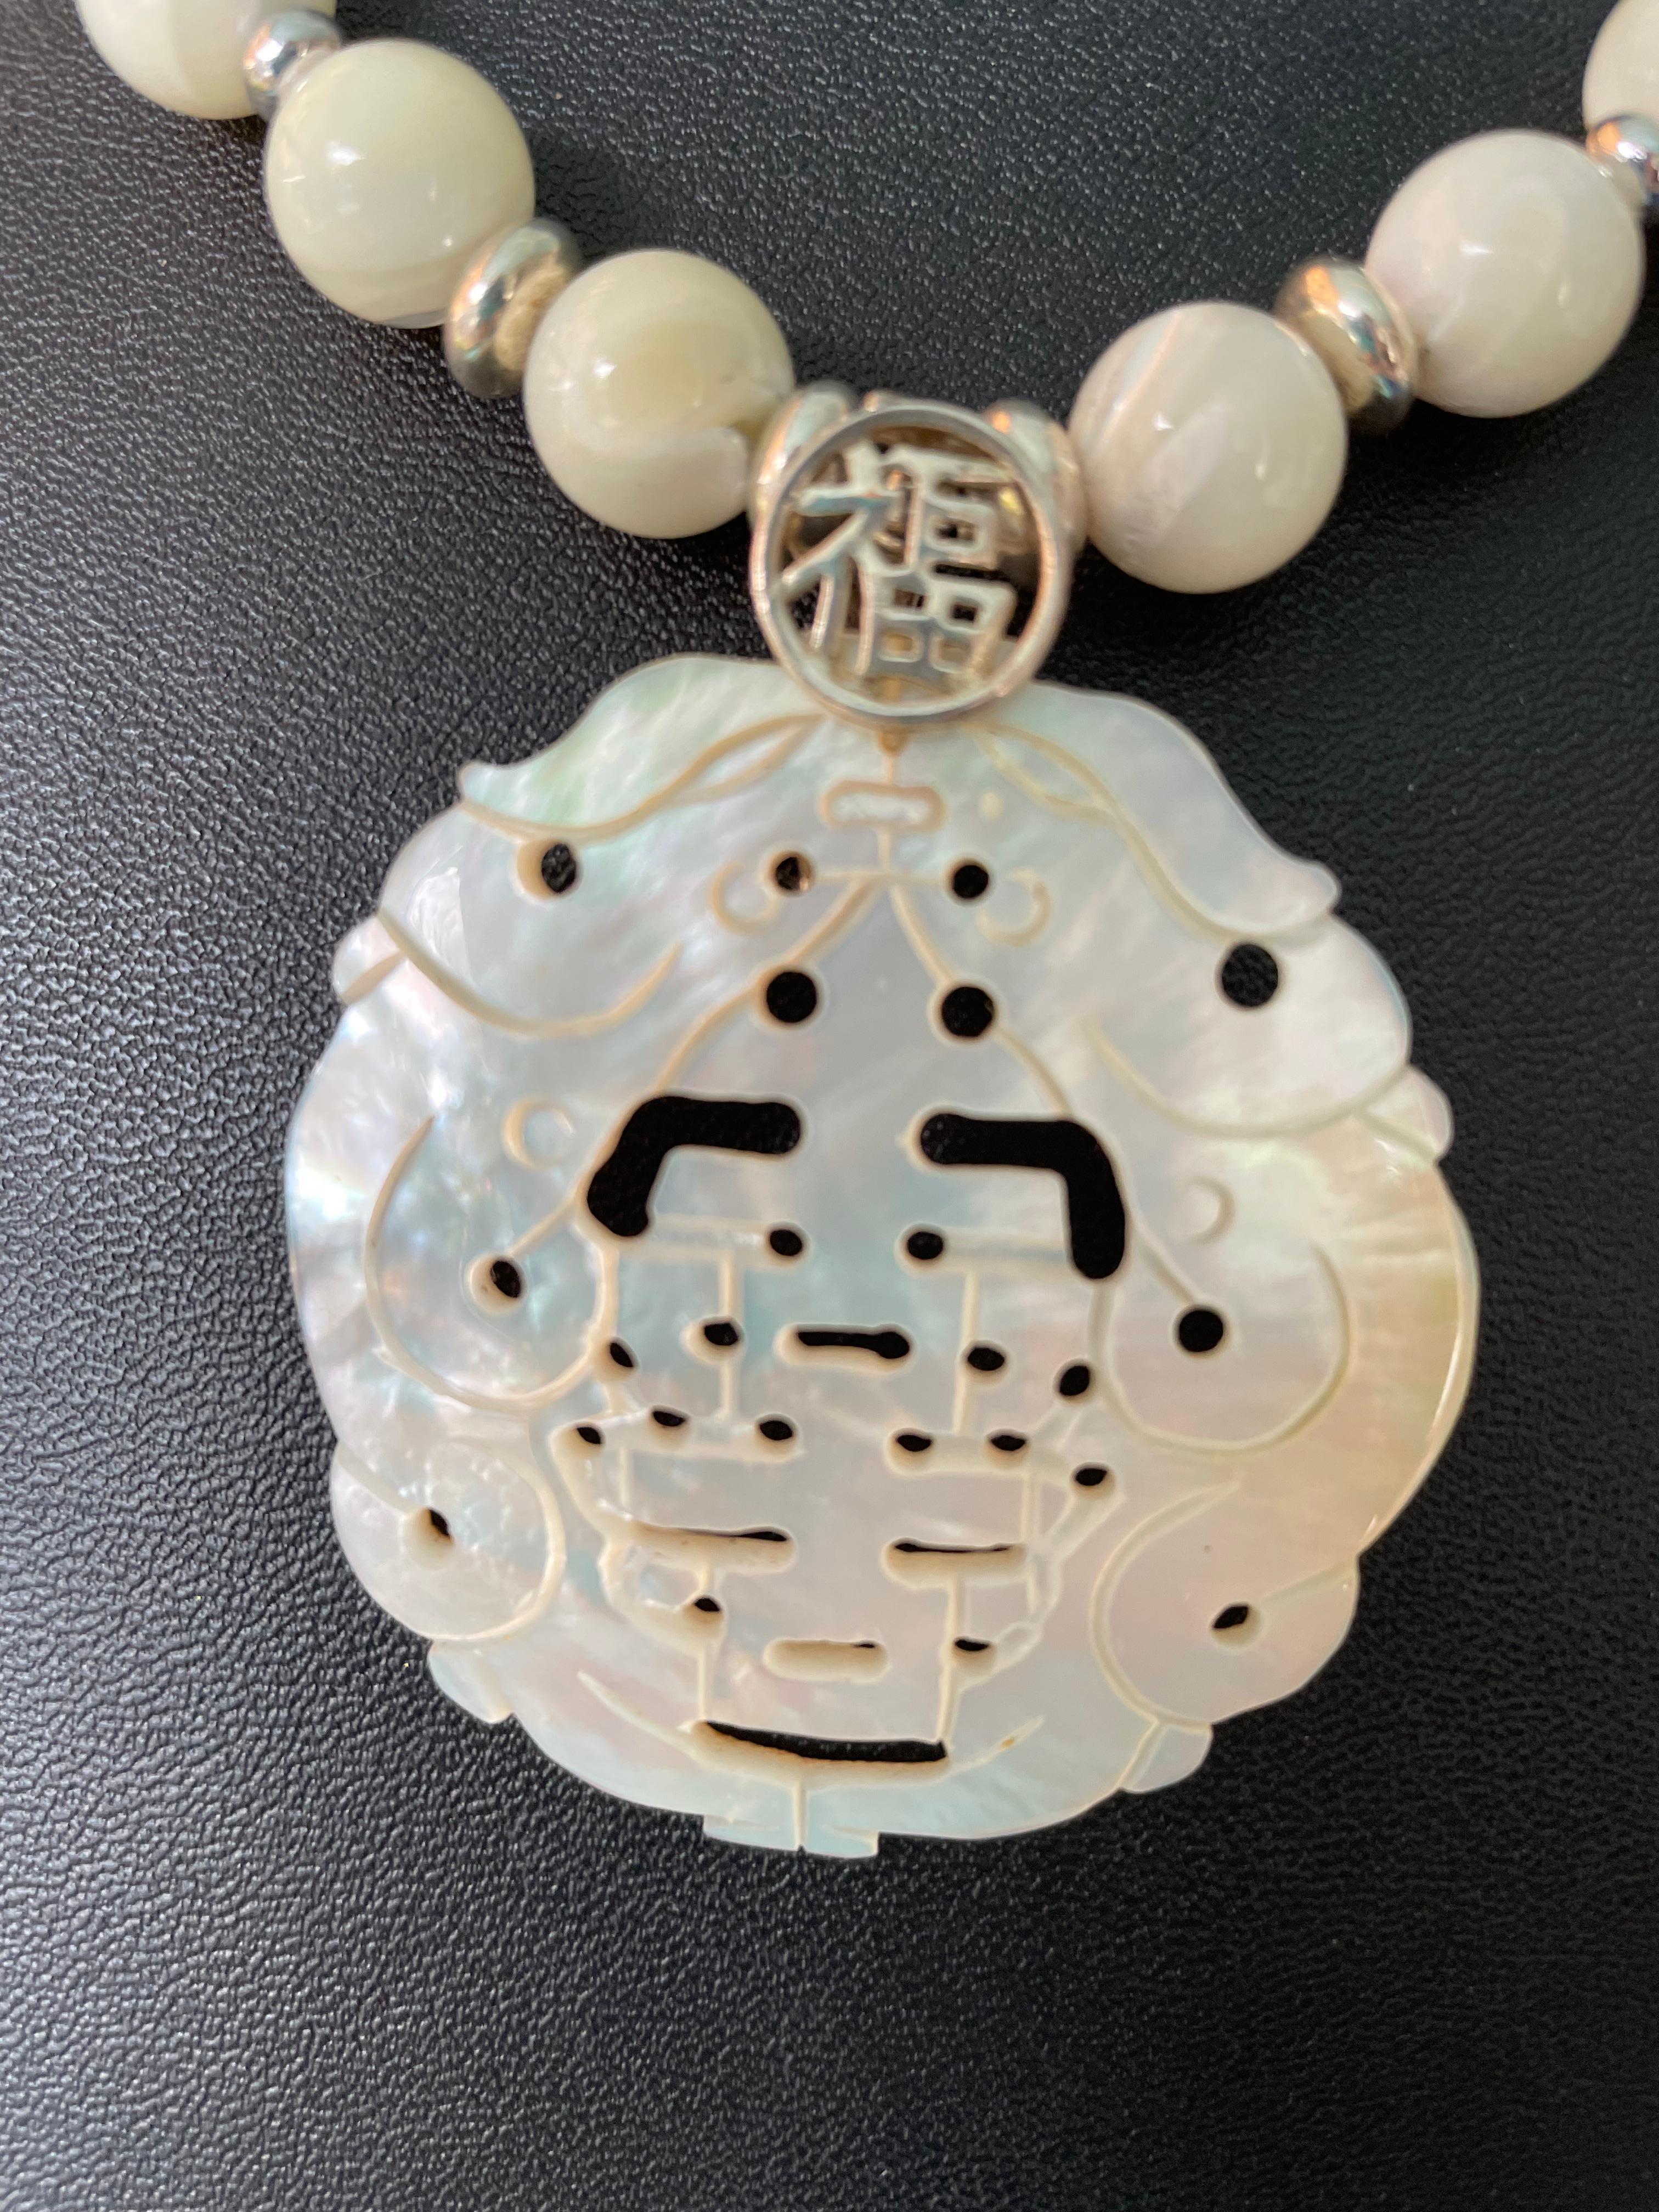 LB hand Carved Antique Chinese Mother of Pearl Happiness pendant is on offer. This lovely, delicate, stunning piece is sure to please. It has been carefully hand carved and incised to create depth and texture. The iridescence of the shell is amazing